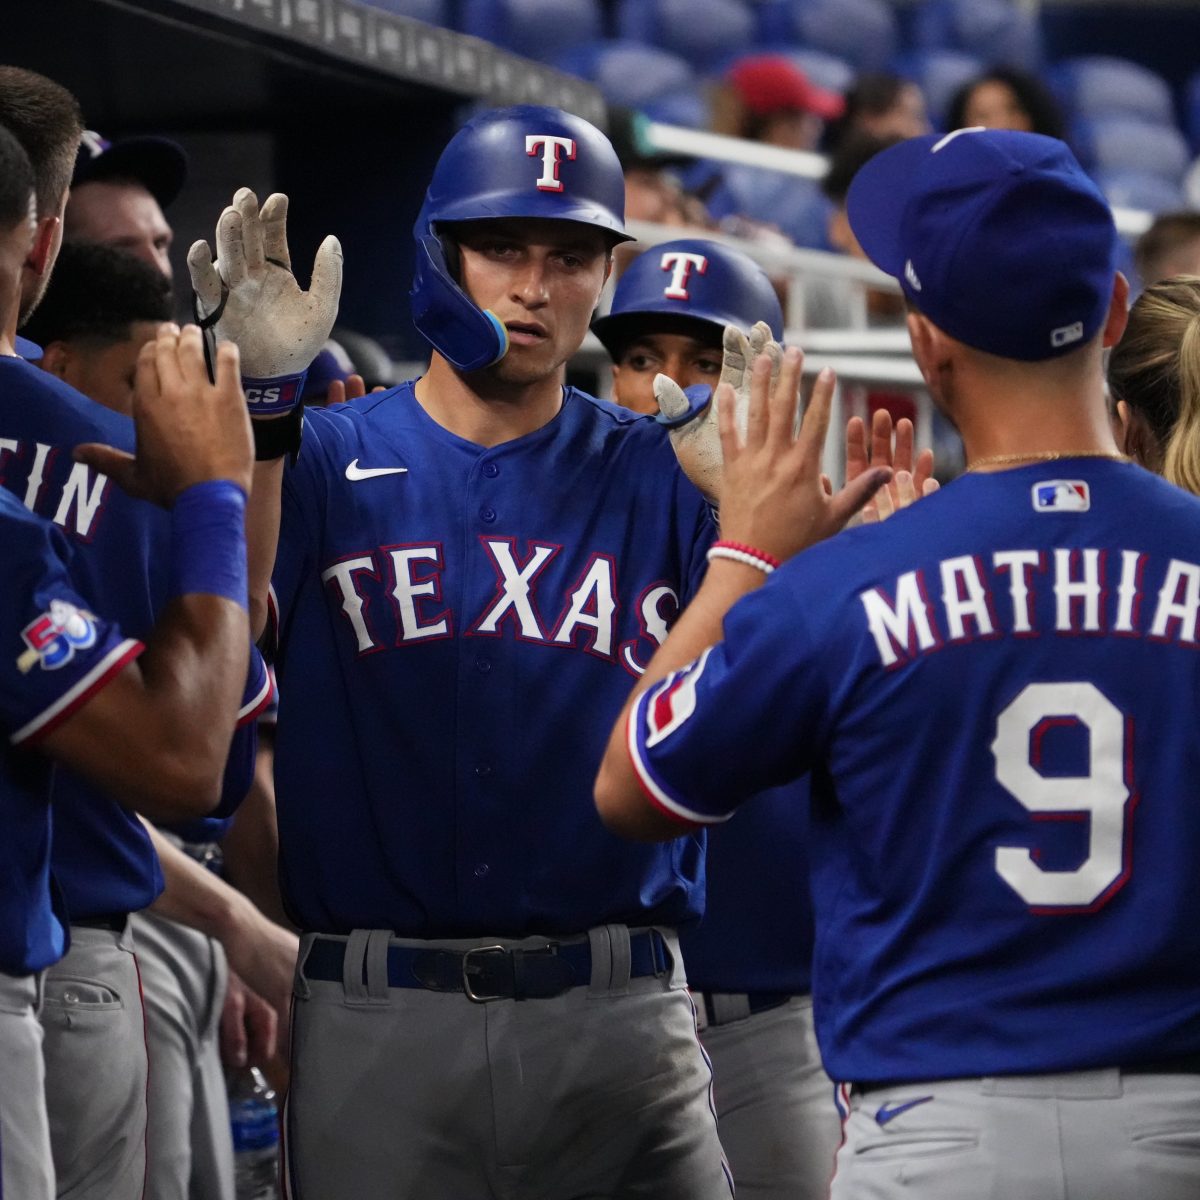 Los Angeles Angels vs. Texas Rangers Prediction, Preview, and Odds - 9-21-2022